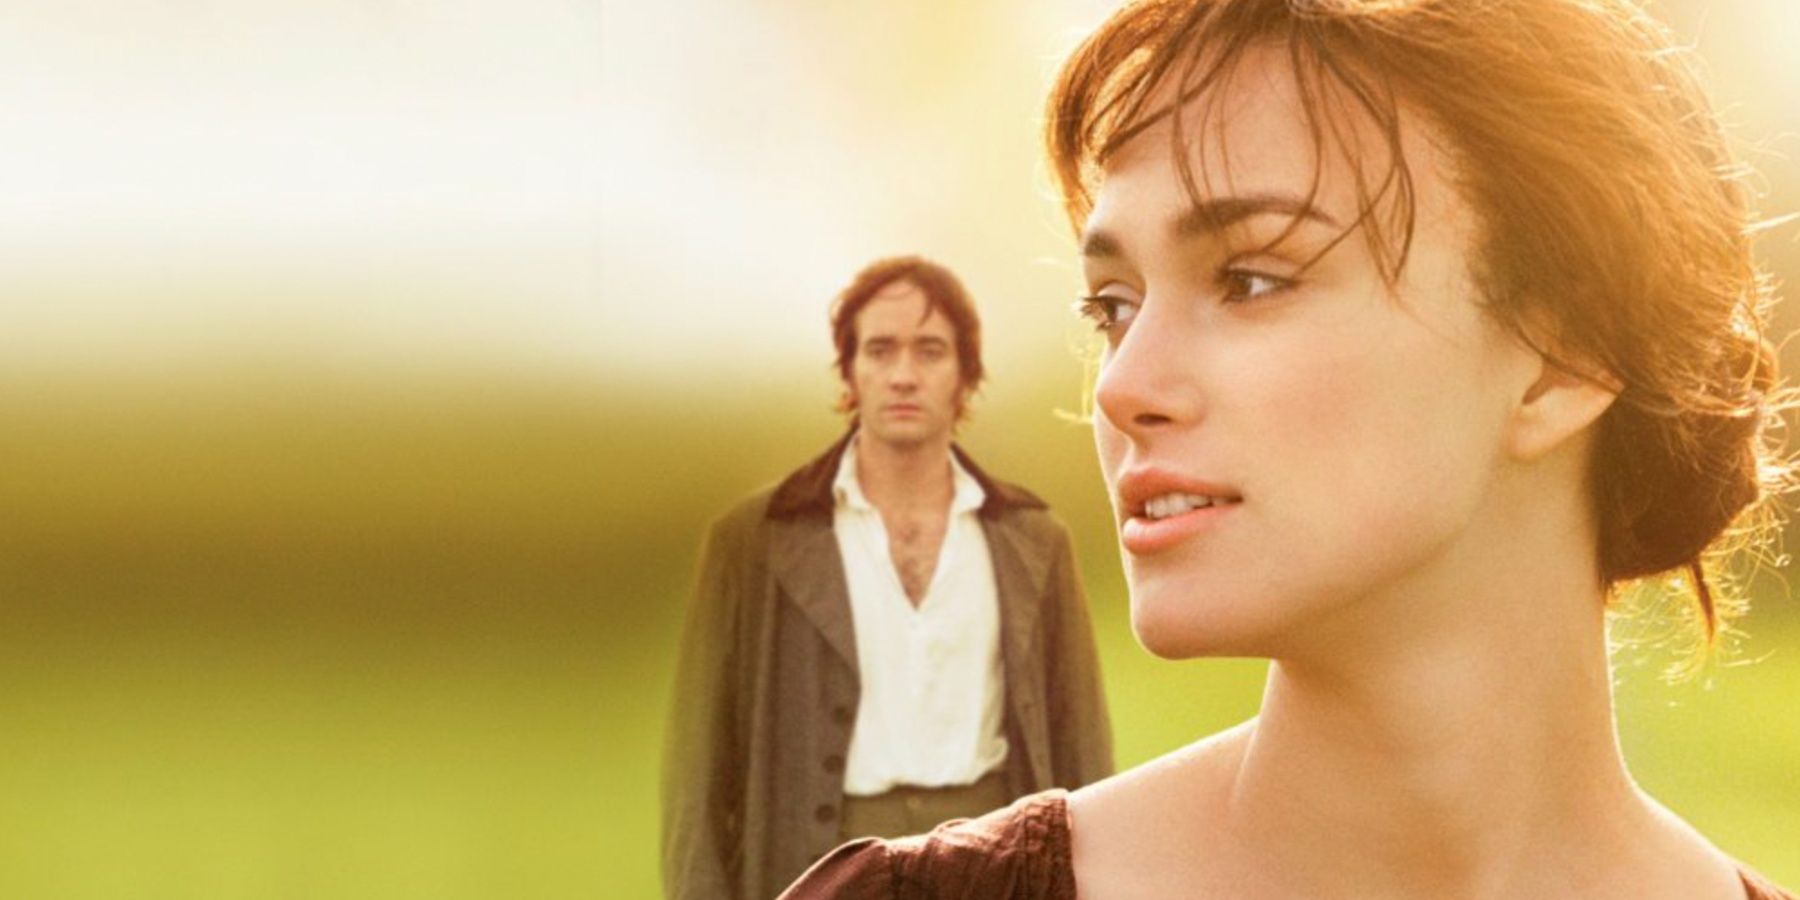 A gold tinted image features Elizabeth Bennet in the foreground and Mr. Darcy in the background for Pride and Prejudice 2005